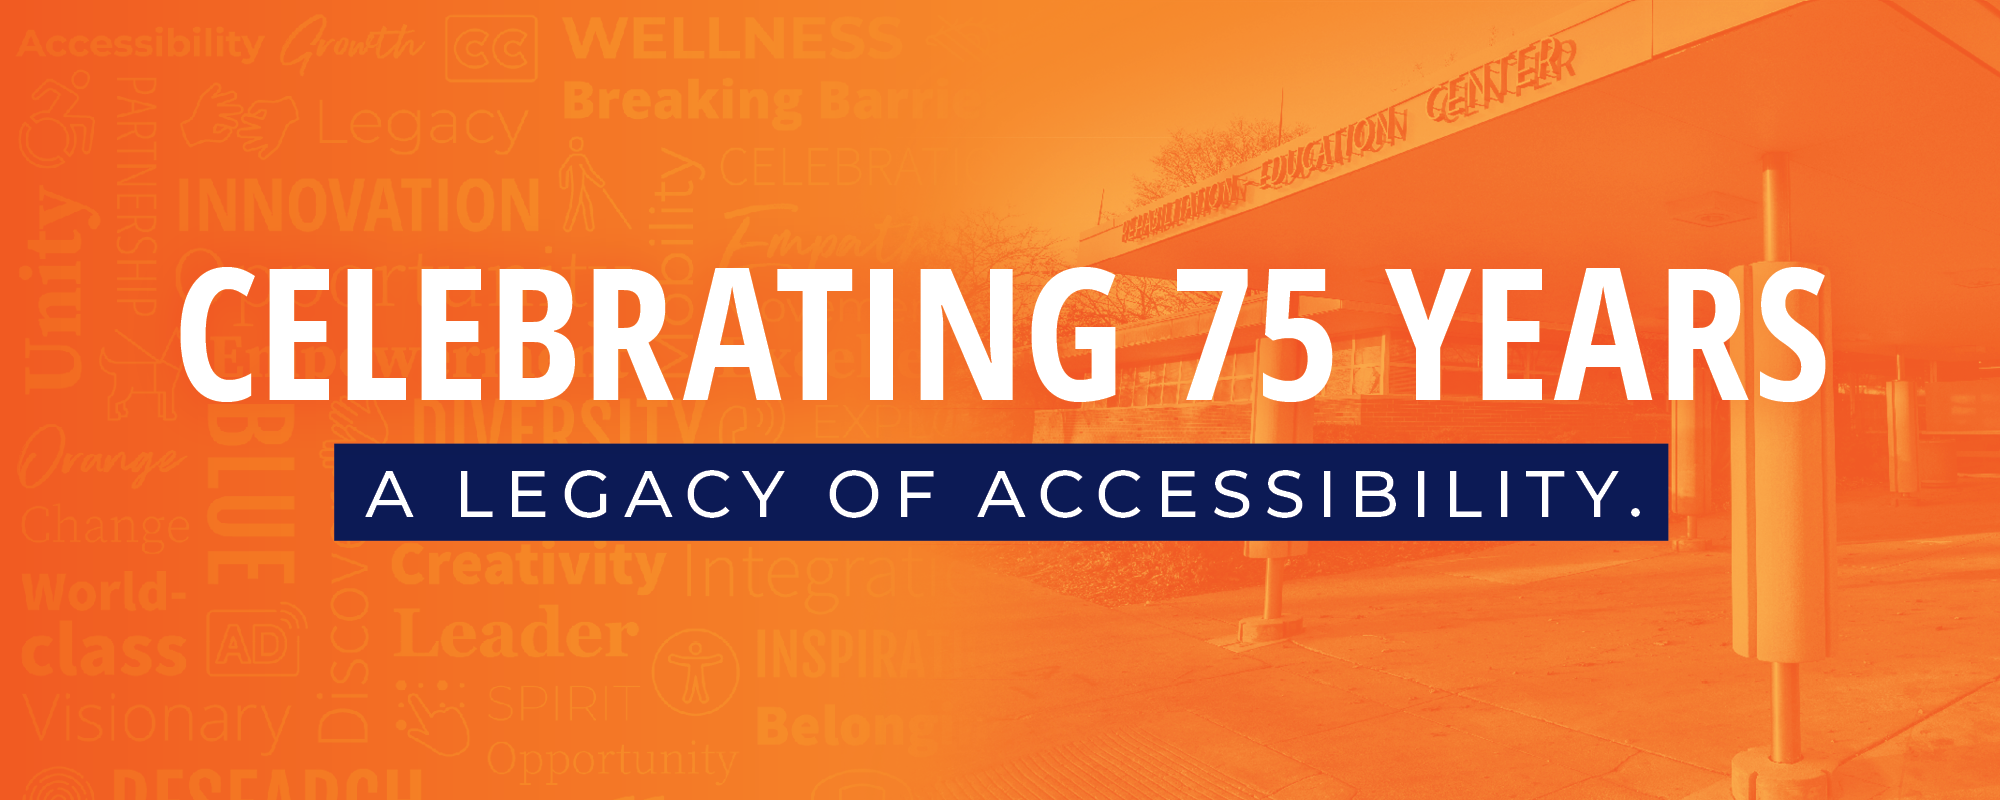 An Orange Image of the front entrance of DRES with the text "Celebrating 75 years. A legacy of accessibility" 